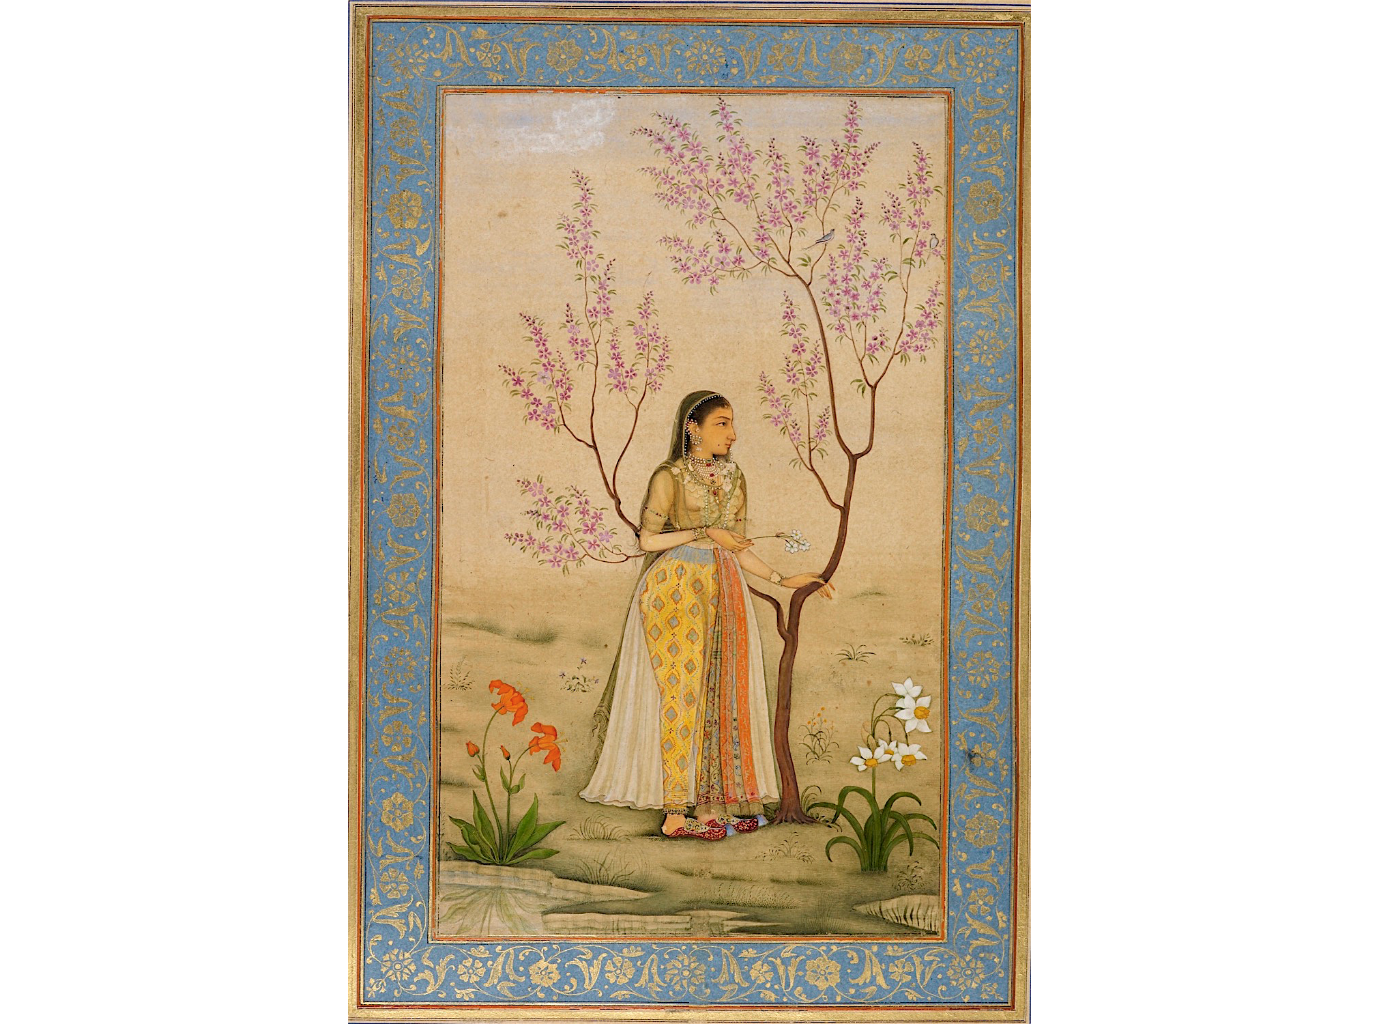 Lady With A Narcissus, Perhaps Mumtaz Mahal, attributed to Bishndas, 1631-33